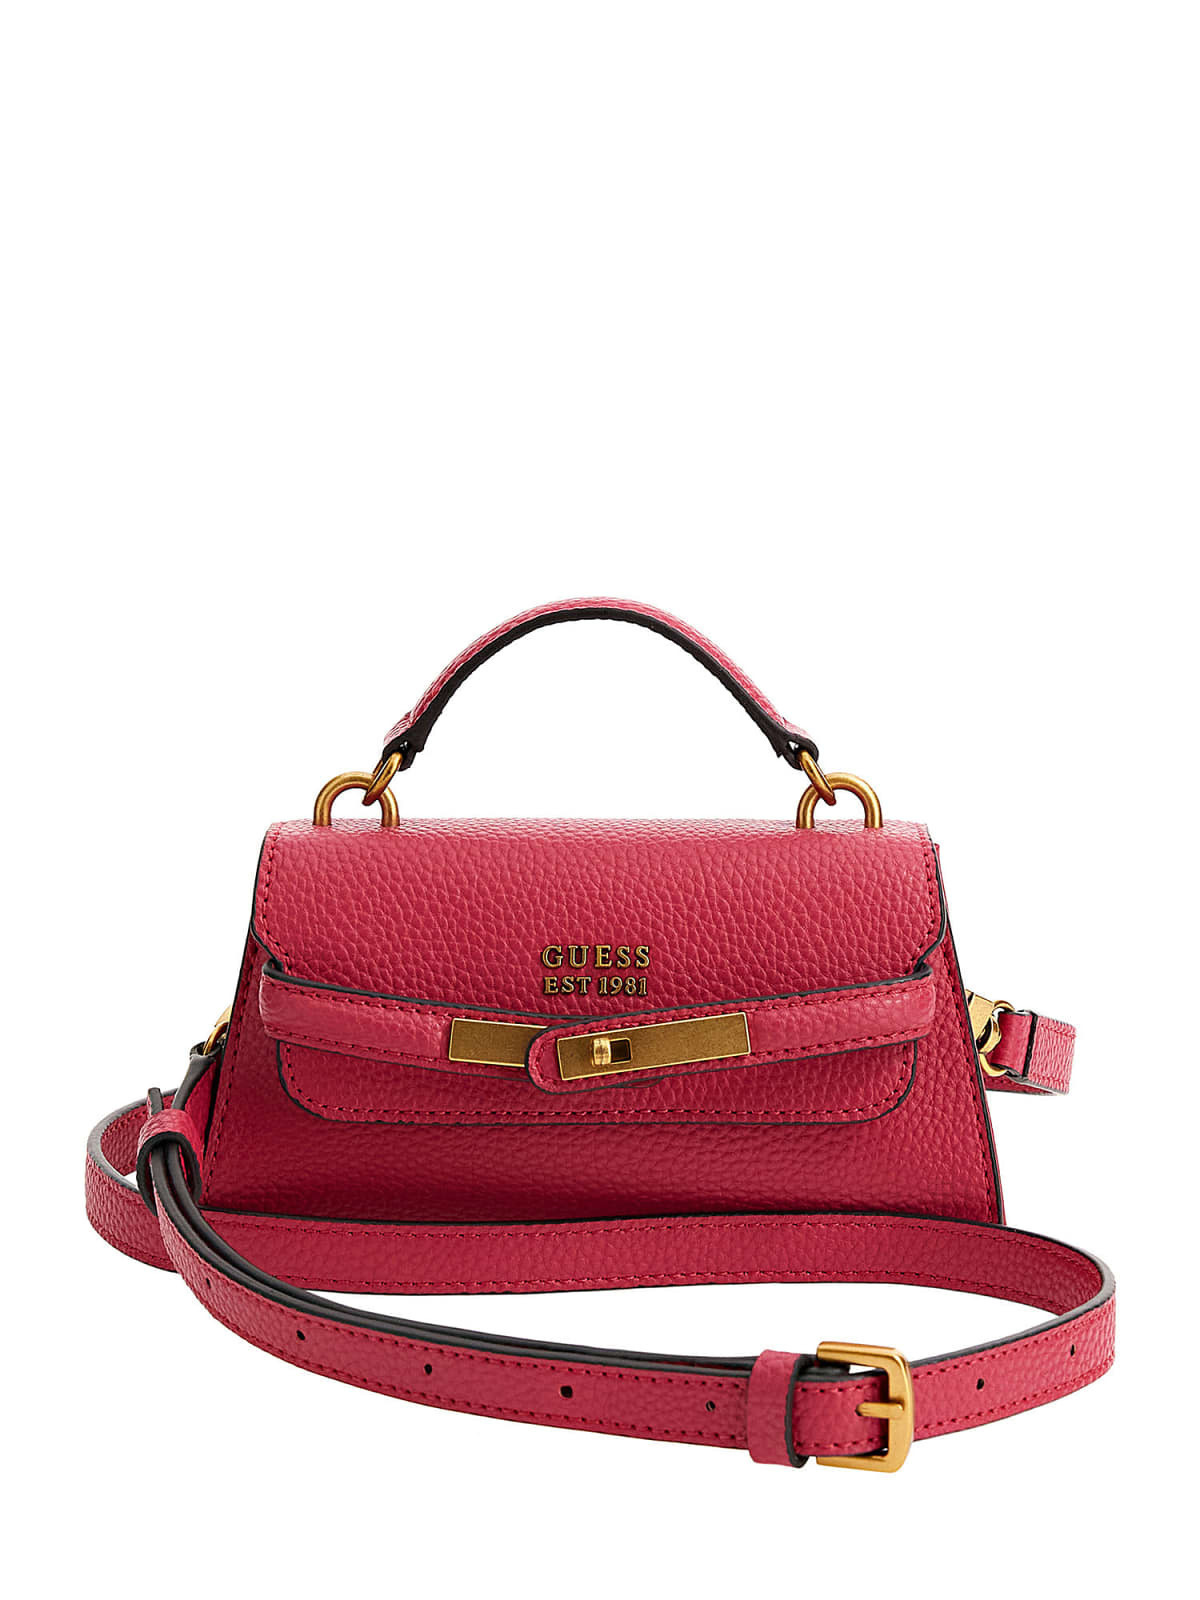 Red Guess tote bag with charm